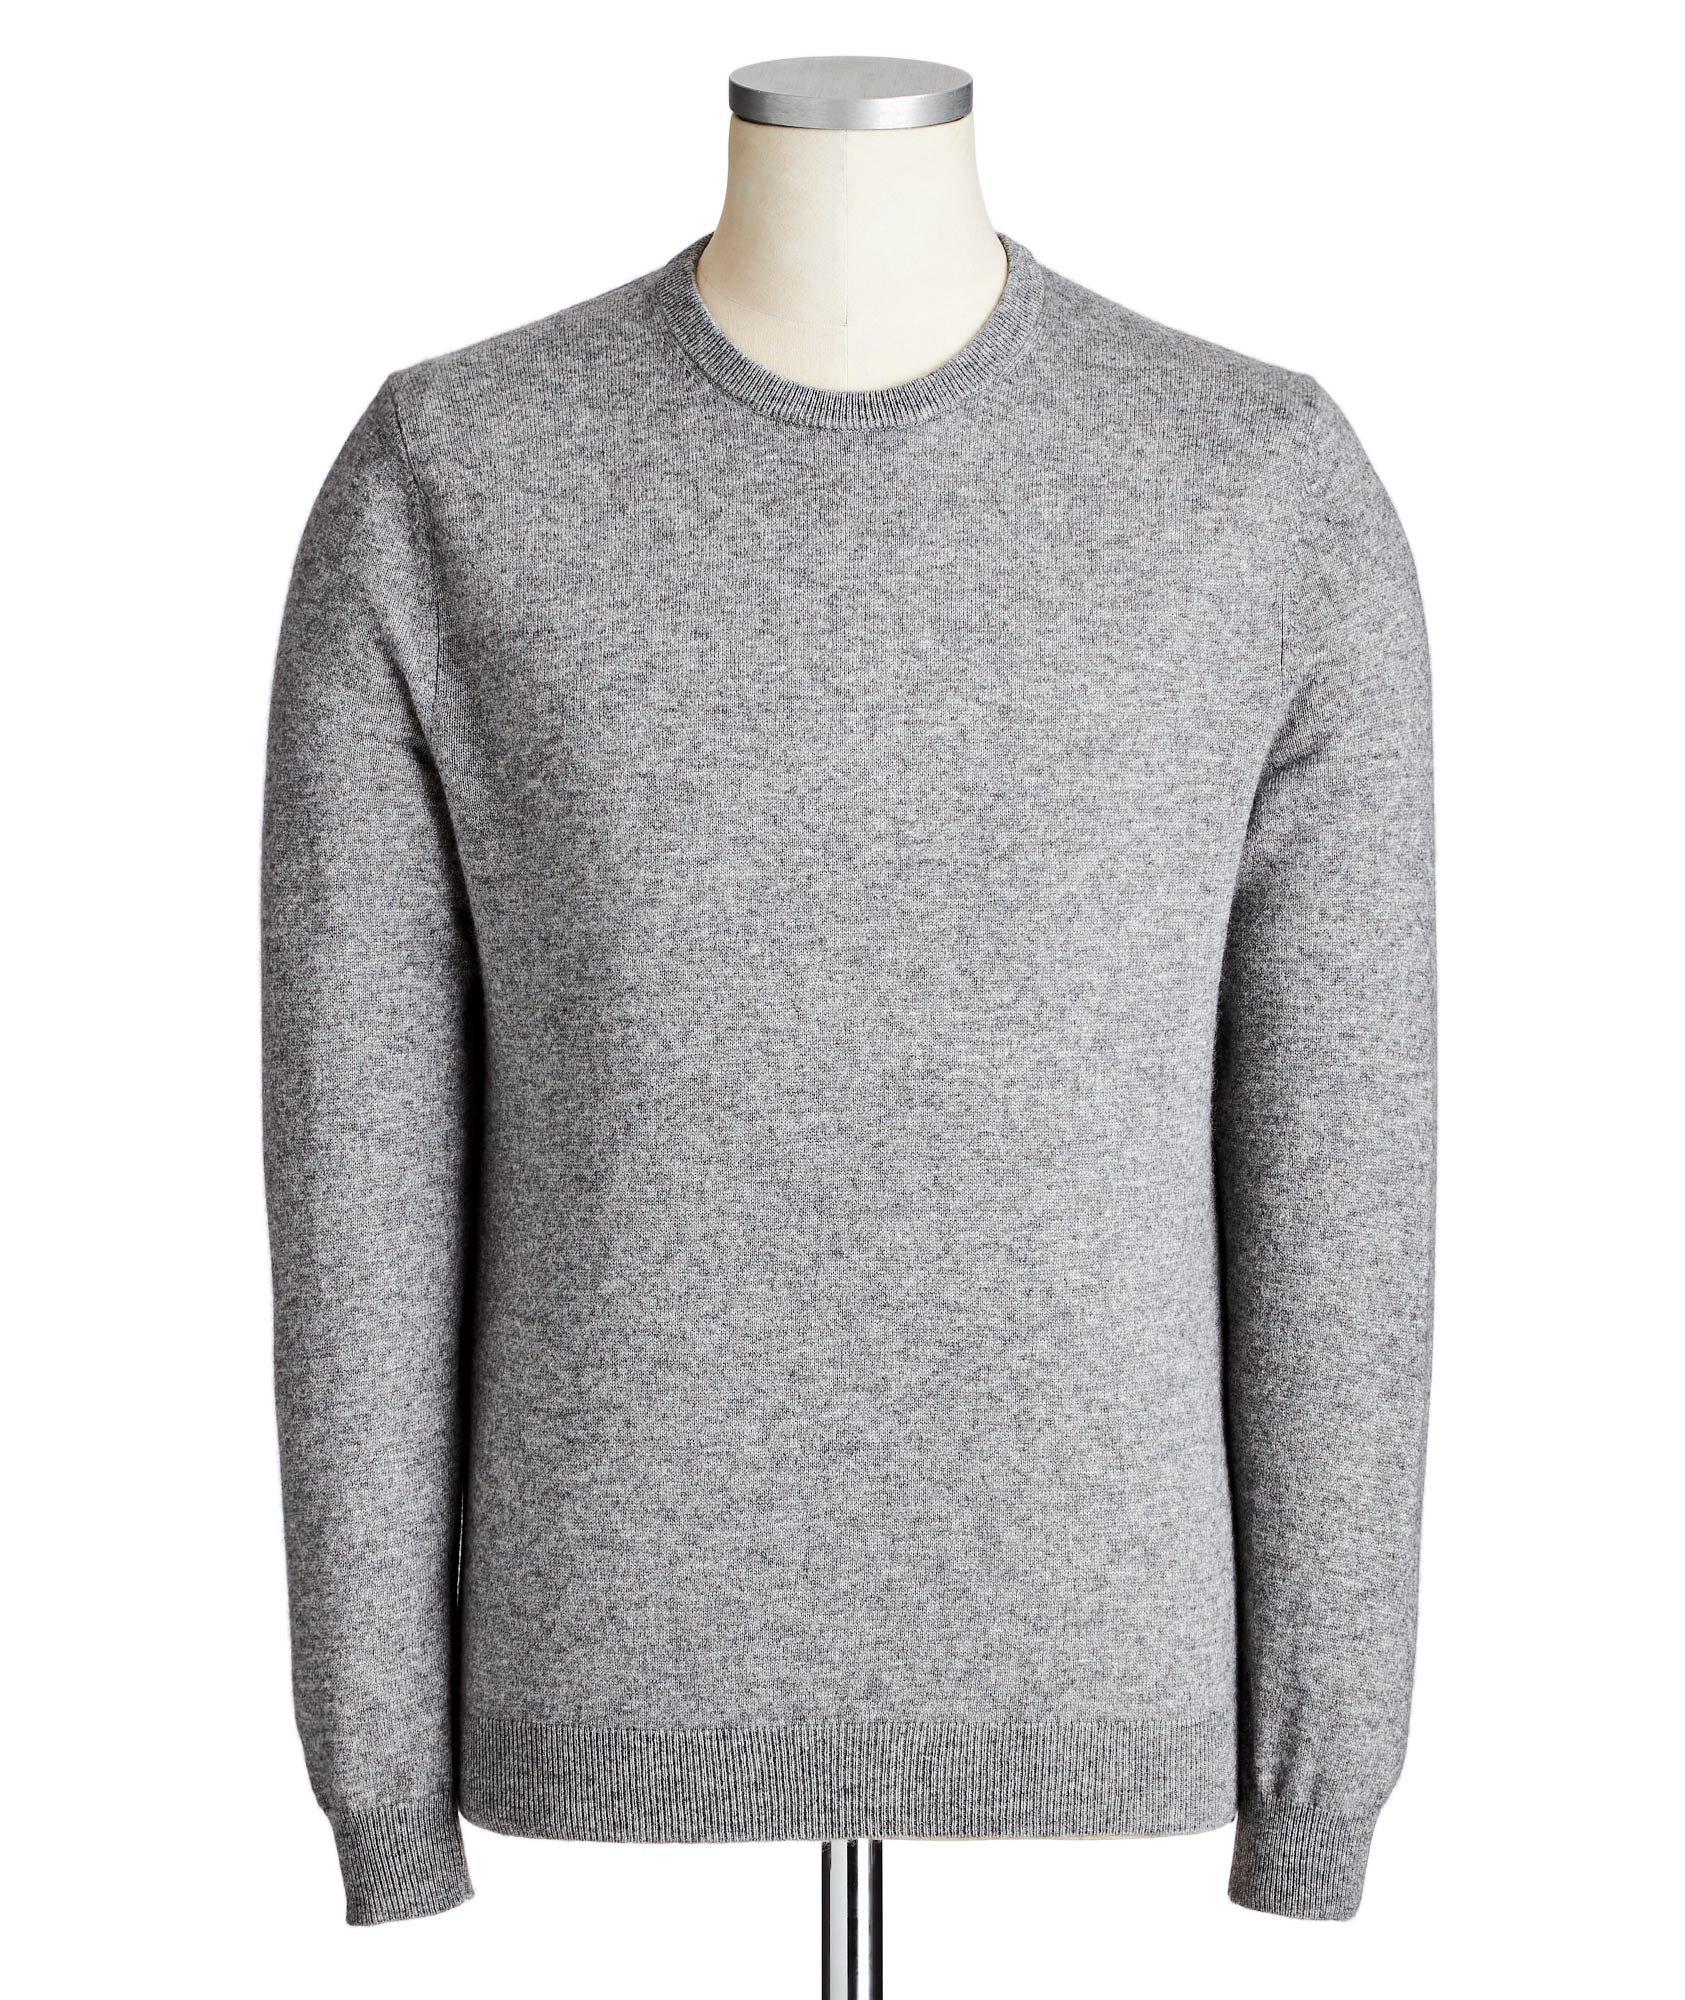 SeaCell Cashmere Sweater image 0